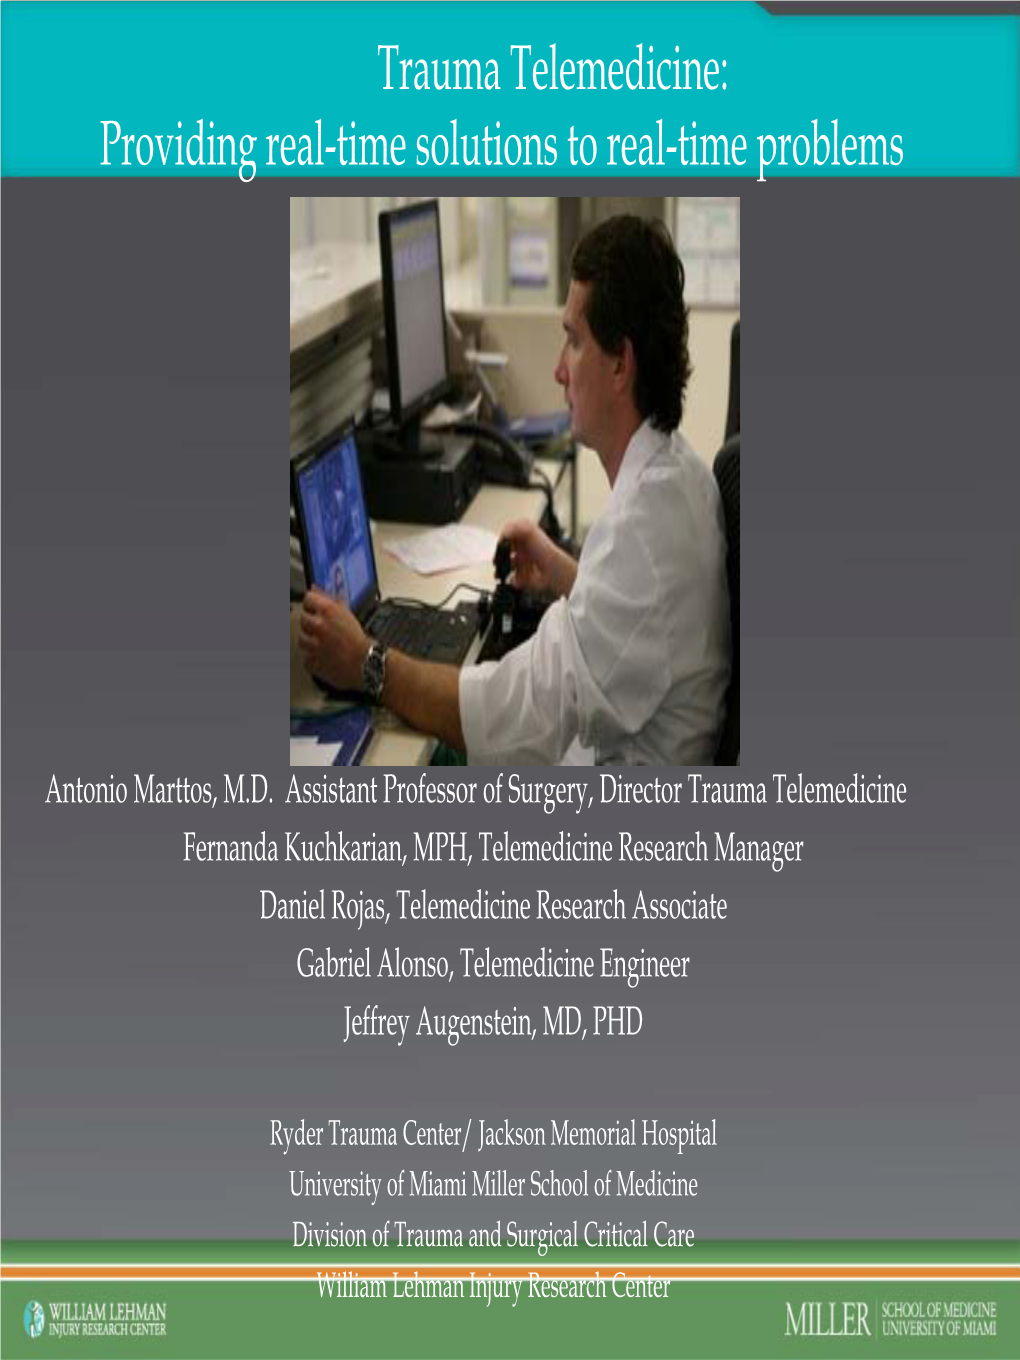 Trauma Telemedicine: Providing Real-Time Solutions to Real-Time Problems